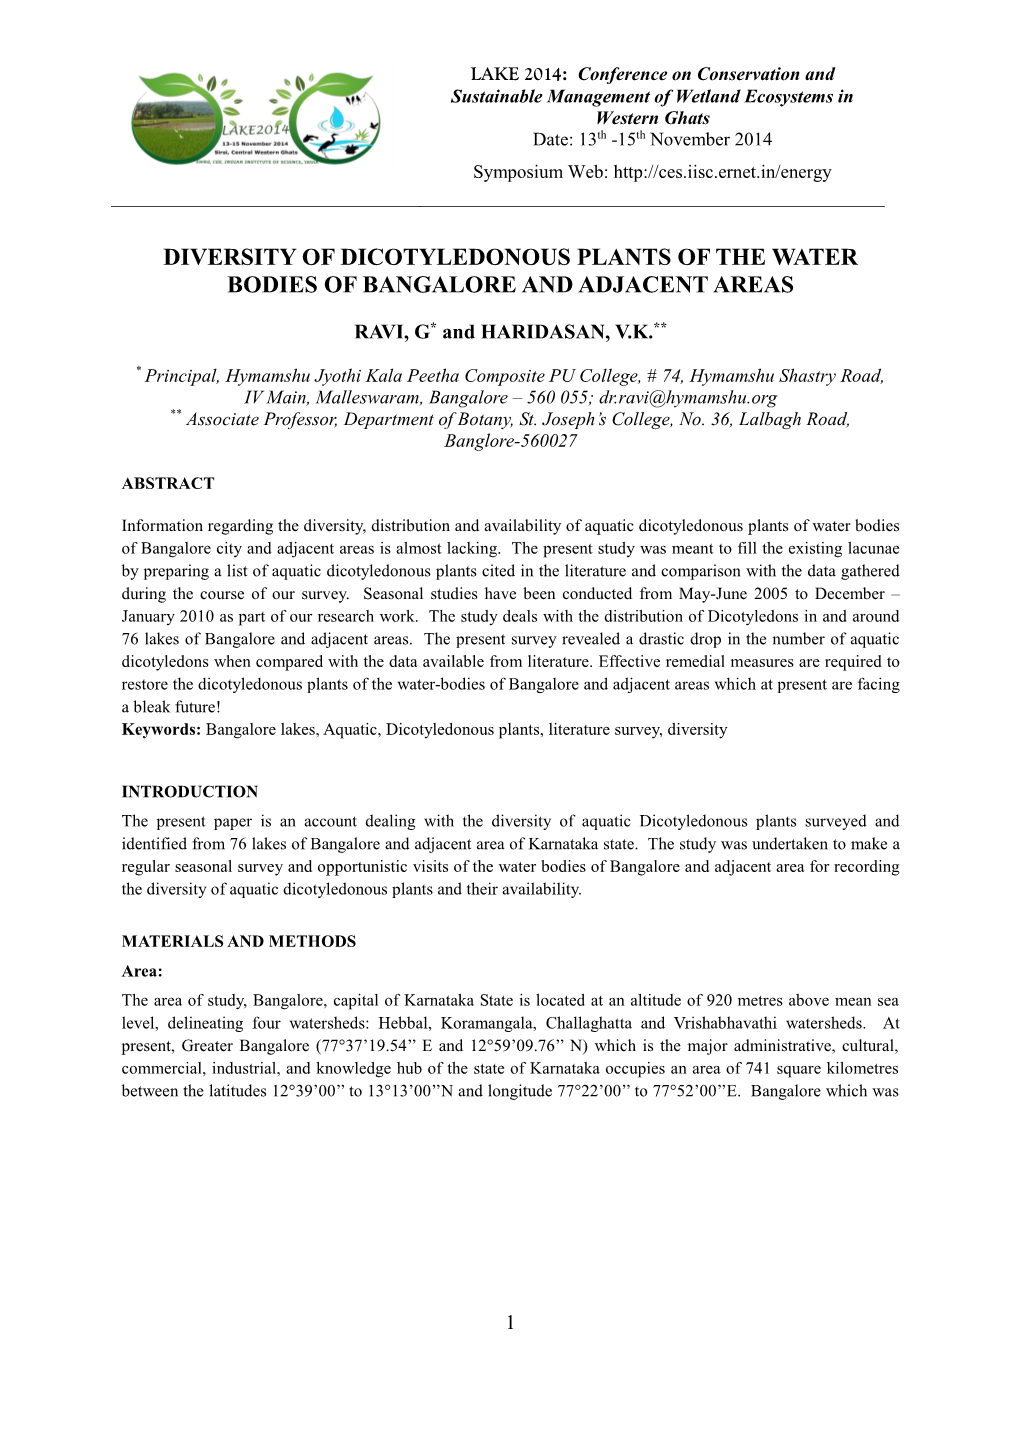 Diversity of Dicotyledons Plants of the Water Bodies of Bangalore And